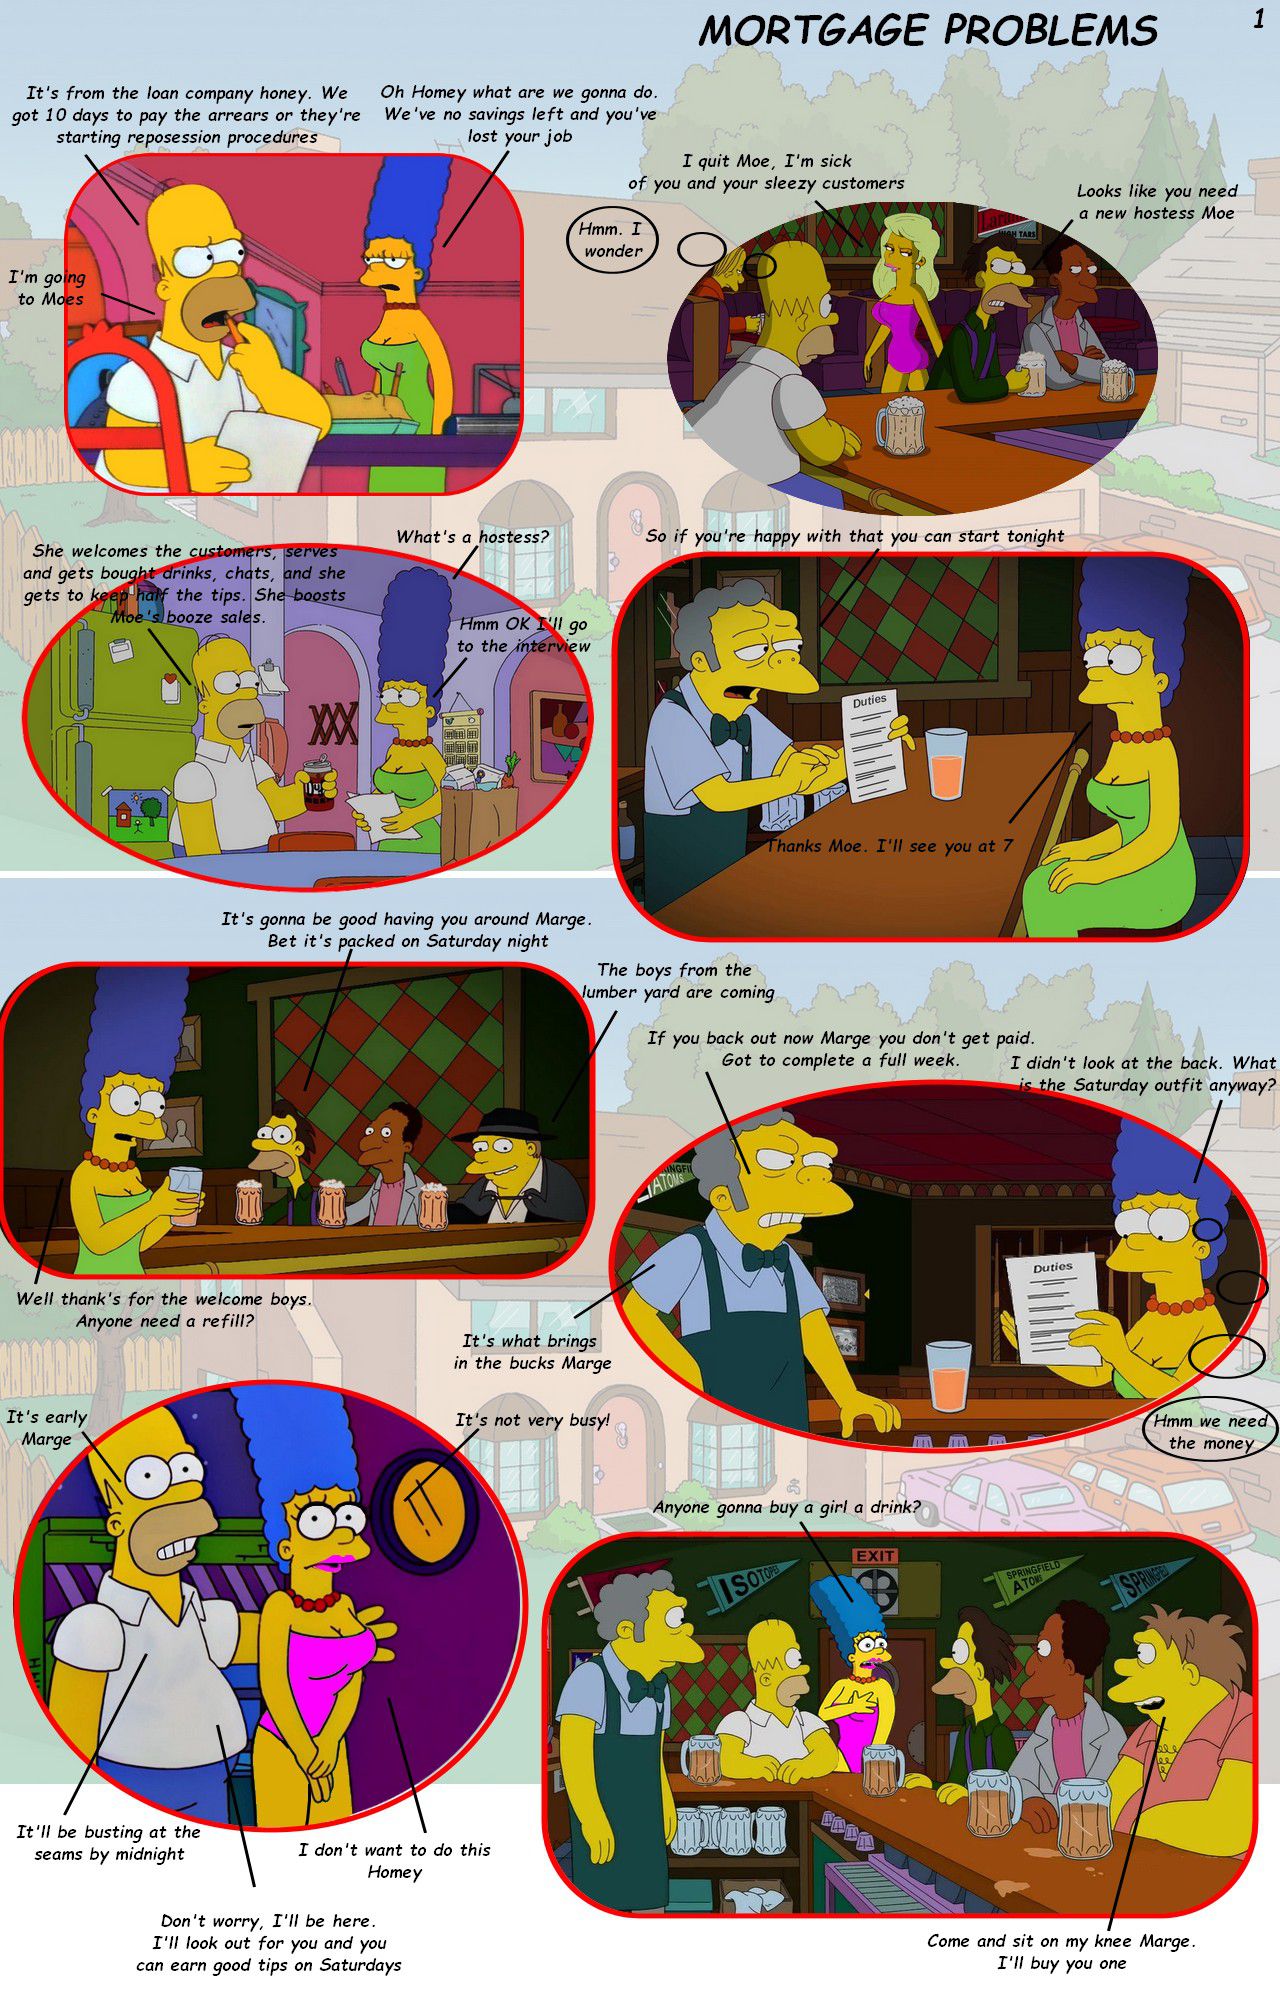 Mortgage Problems (The Simpsons) - Mortgage Problems - (The Simpsons) picture